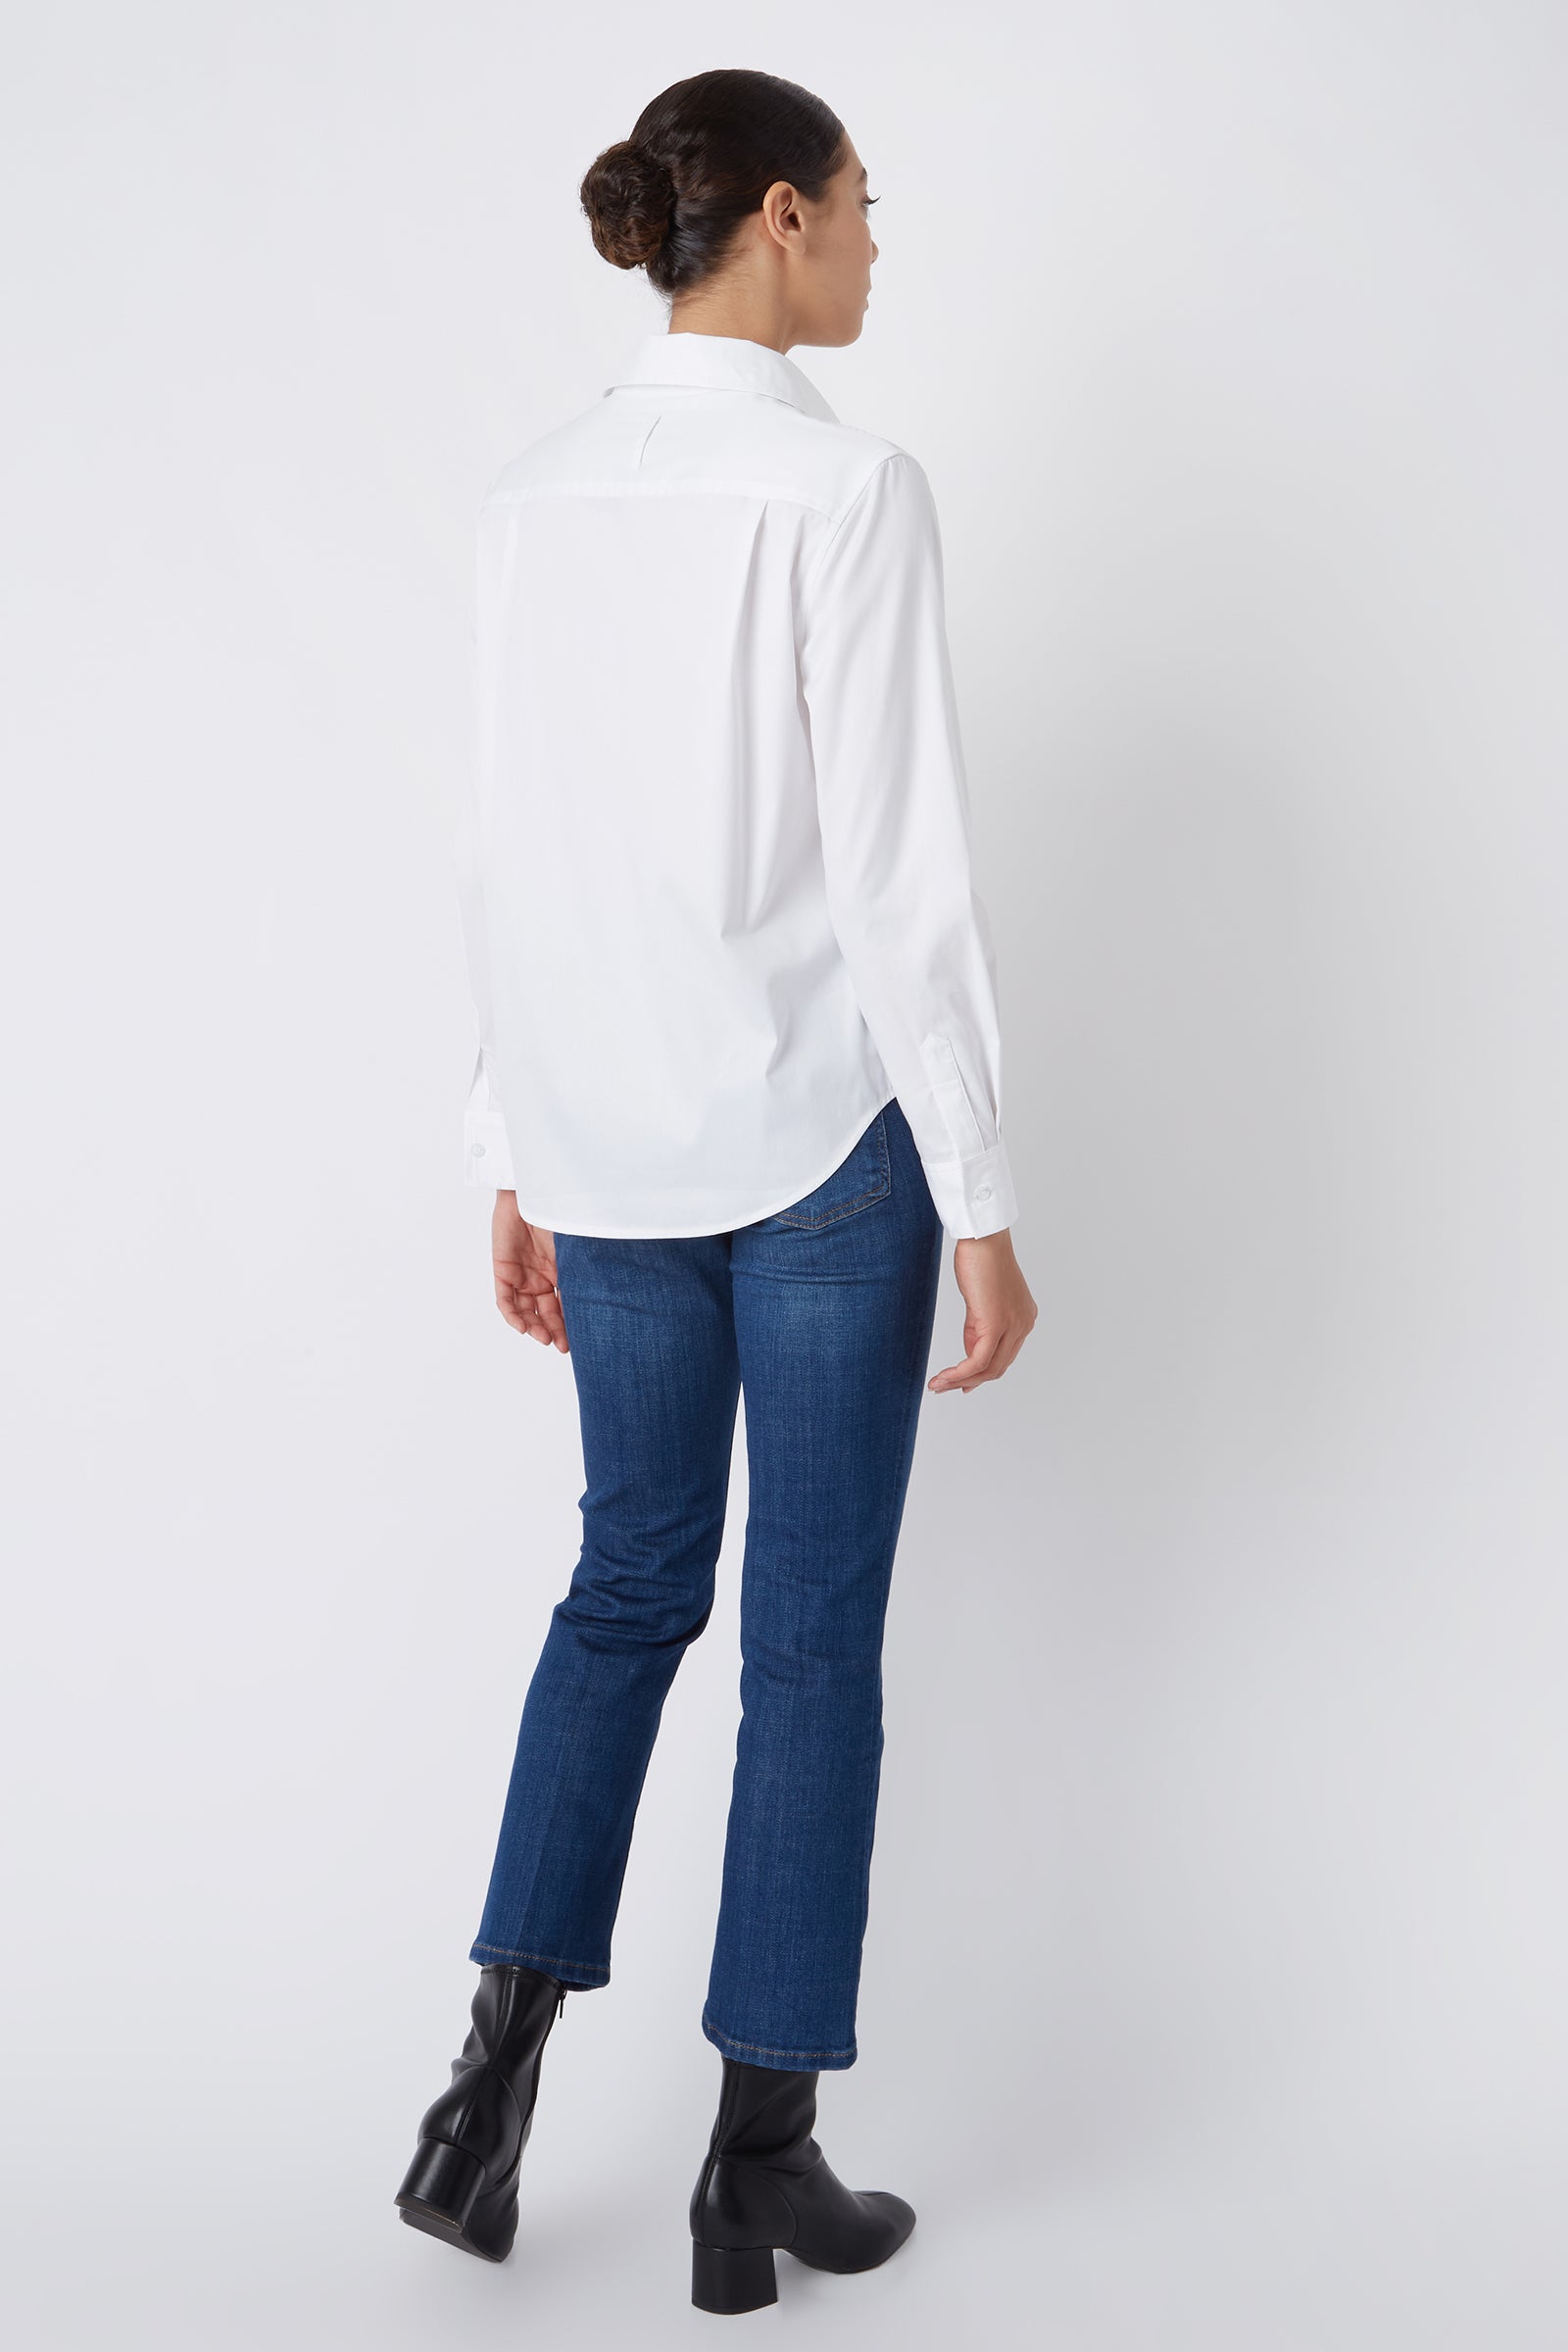 Kal Rieman Classic Tailored Shirt in White Pinpoint Oxford on Model Full Front View